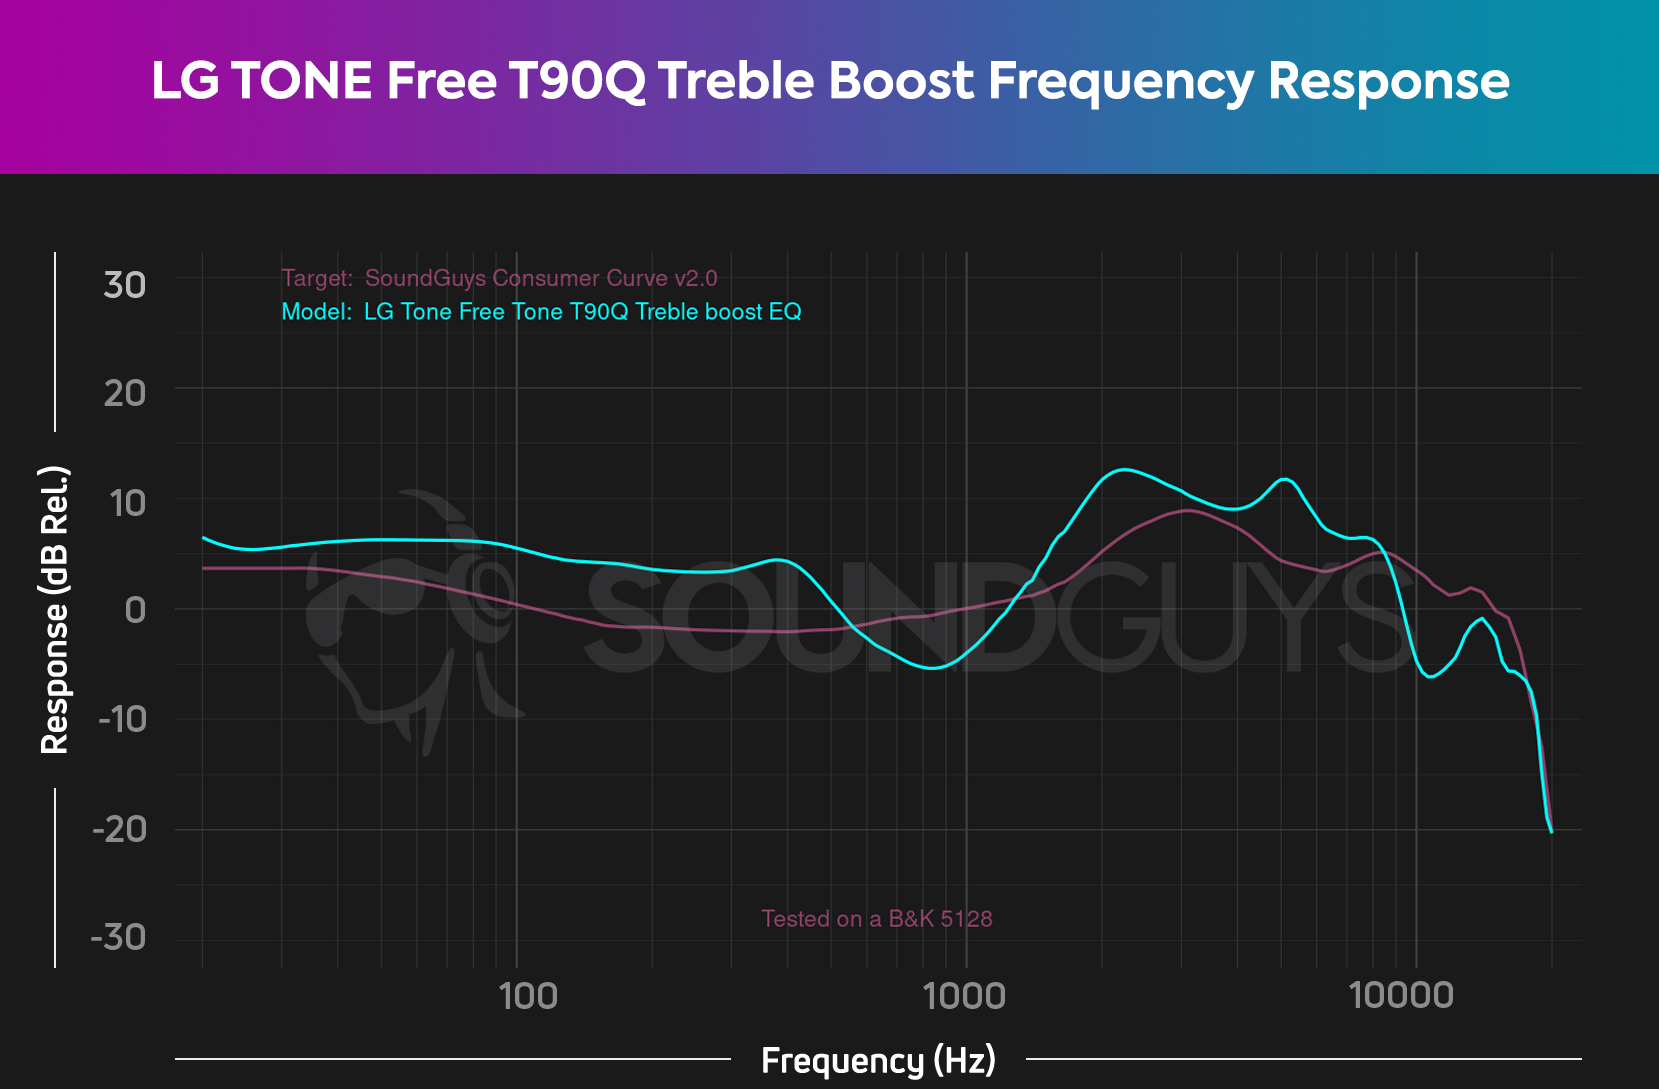 The frequency response chart for the LG TONE Free T90Q showing the treble boost EQ setting, with a less emphasized bass range.